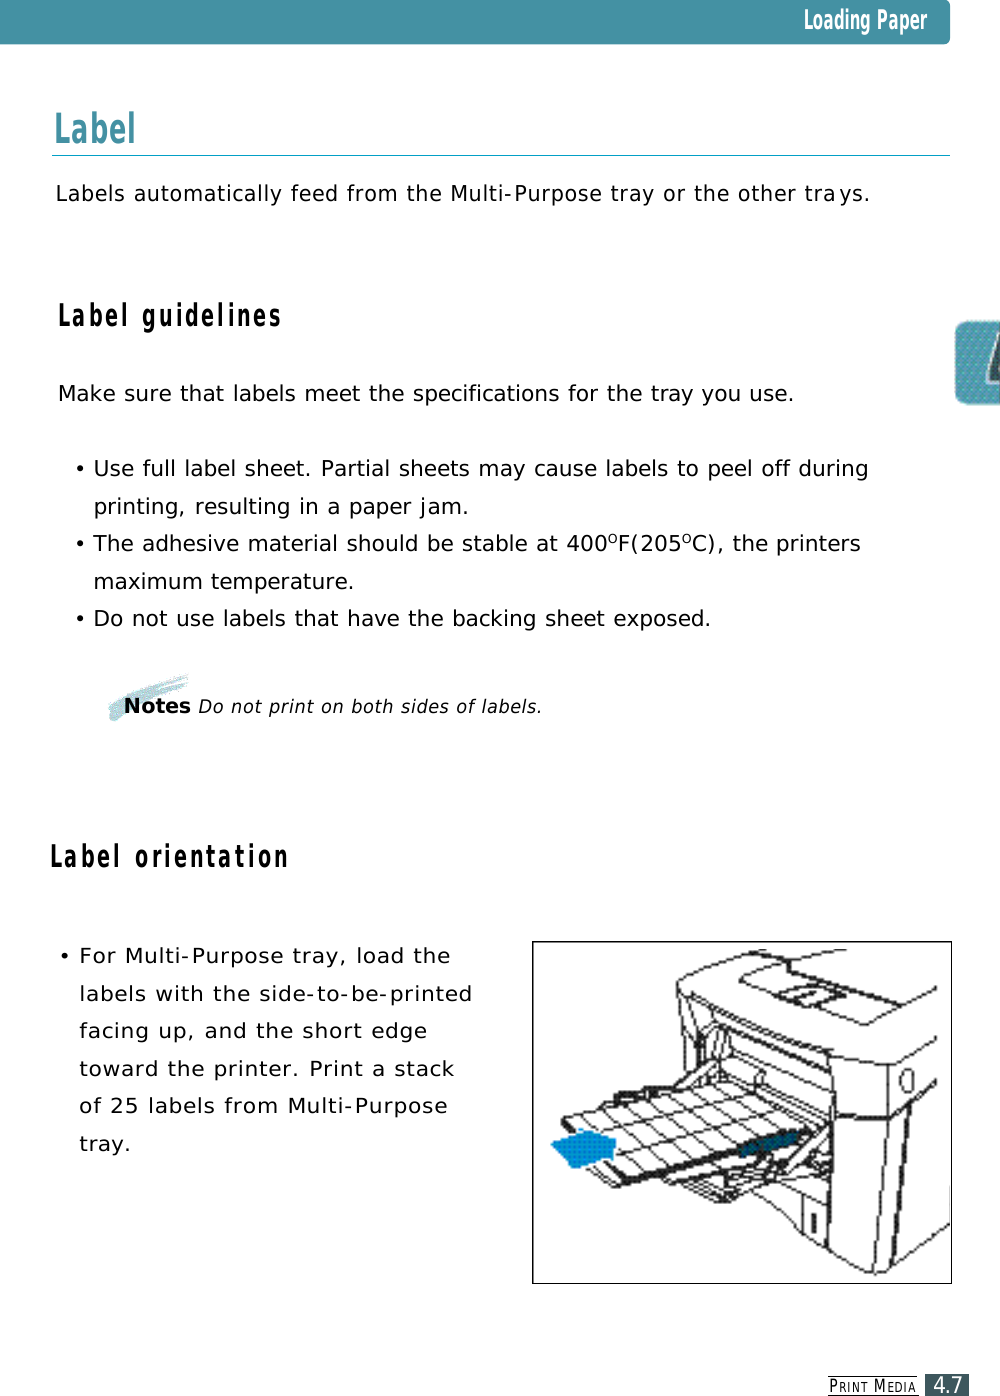 PR I N T ME D I A4.7Labels automatically feed from the Multi-Purpose tray or the other tray s .Label guidelinesMake sure that labels meet the specifications for the tray you use.•Use full label sheet. Partial sheets may cause labels to peel off duringprinting, resulting in a paper jam.•The adhesive material should be stable at 400OF(205OC), the printersmaximum temperature.•Do not use labels that have the backing sheet exposed.• For Multi-Purpose tray, load thelabels with the side-to-be-printedfacing up, and the short edget o ward the printer. Print a stackof 25 labels from Multi-Purposet ray.Notes Do not print on both sides of labels.Loading PaperL a b e lLabel orientation